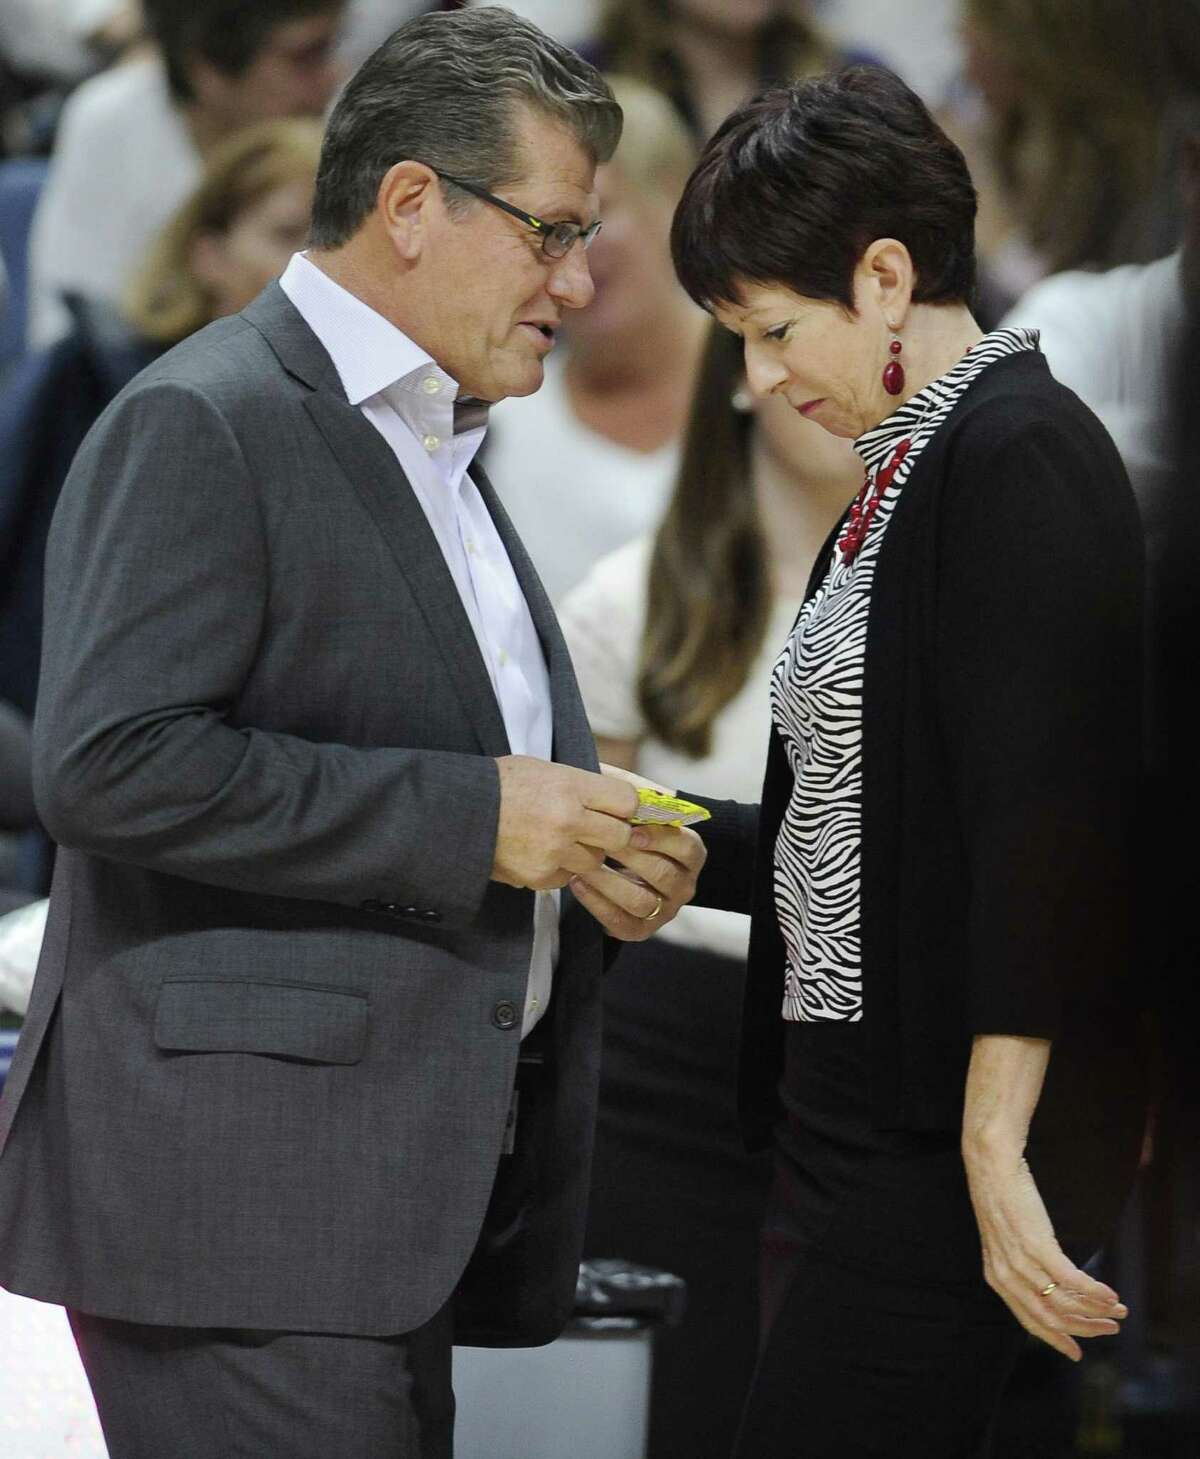 UConn coach Geno Auriemma, left, hands Notre Dame coach Muffet McGraw a gift for her 60th birthday before a 2015 game. The long-running beef between Auriemma and McGraw reared its head again this past week.